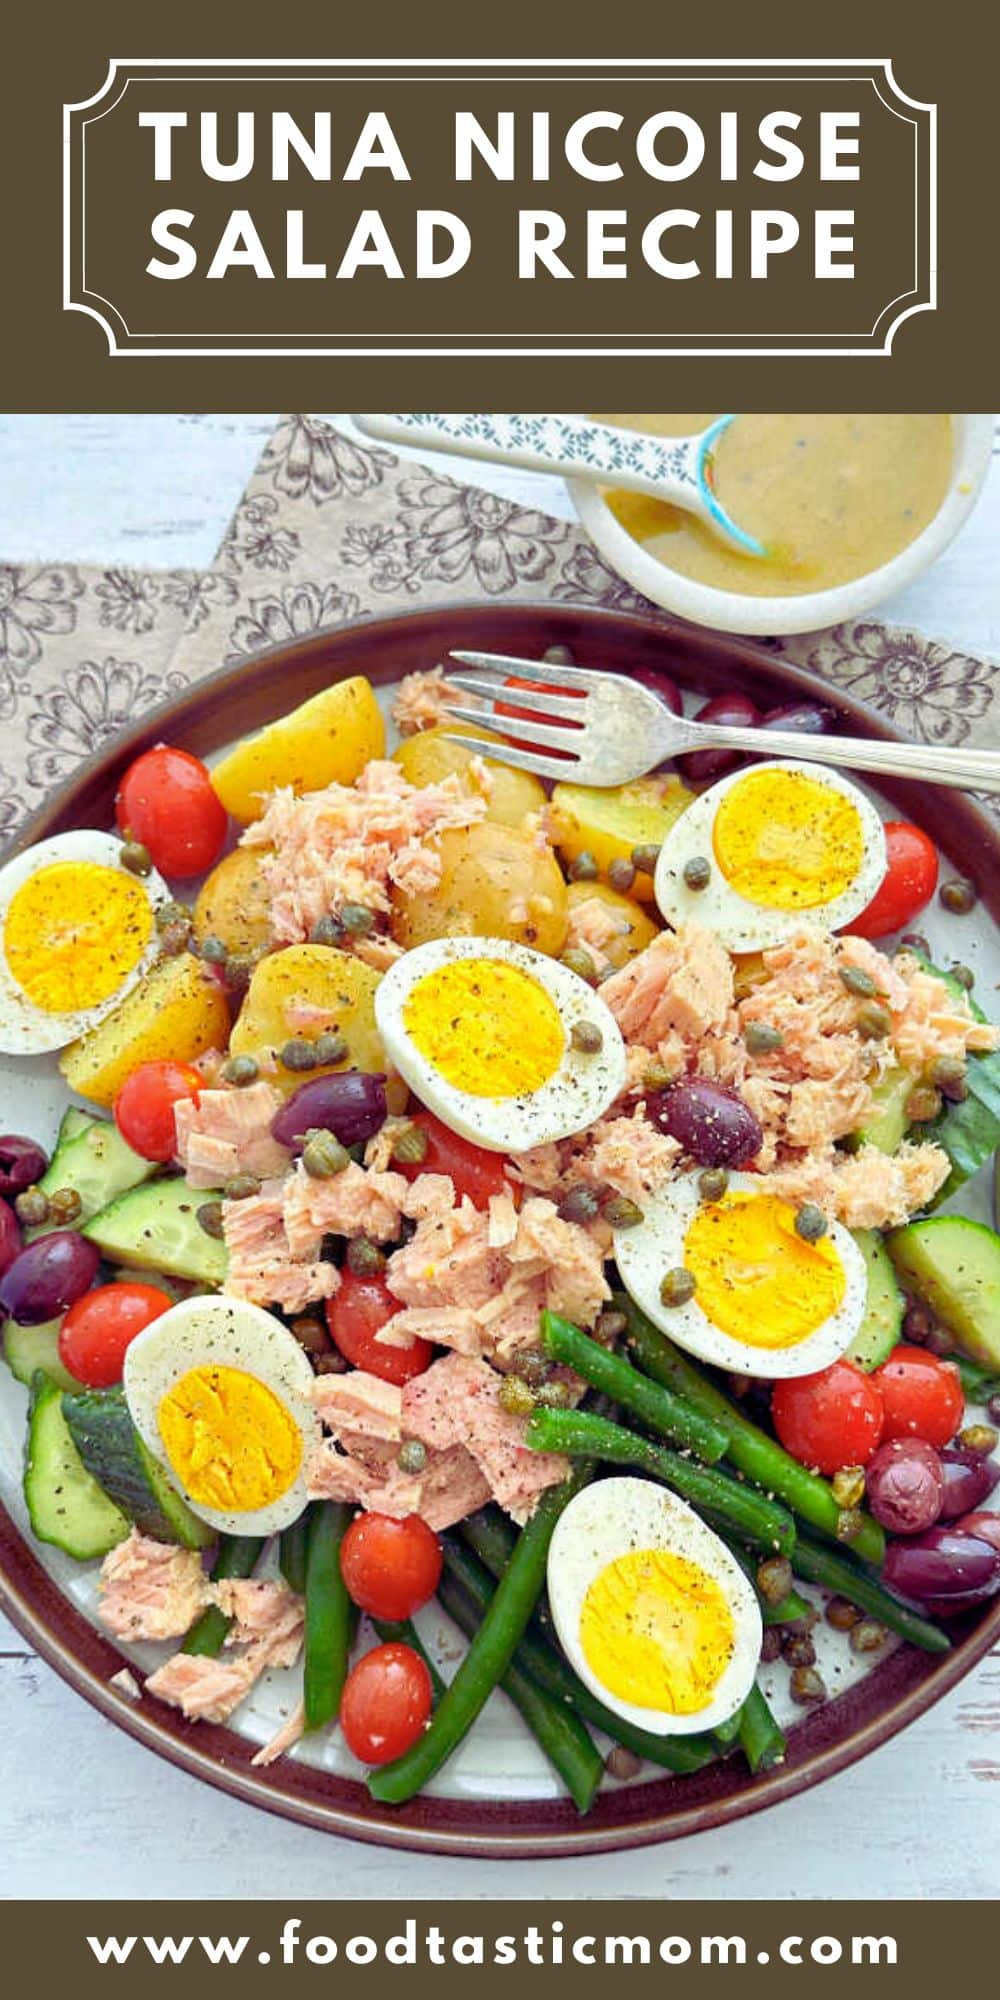 Discover secrets for streamlining the preparation and the best niçoise salad dressing for Tuna Nicoise Salad, a classic French salad. via @foodtasticmom